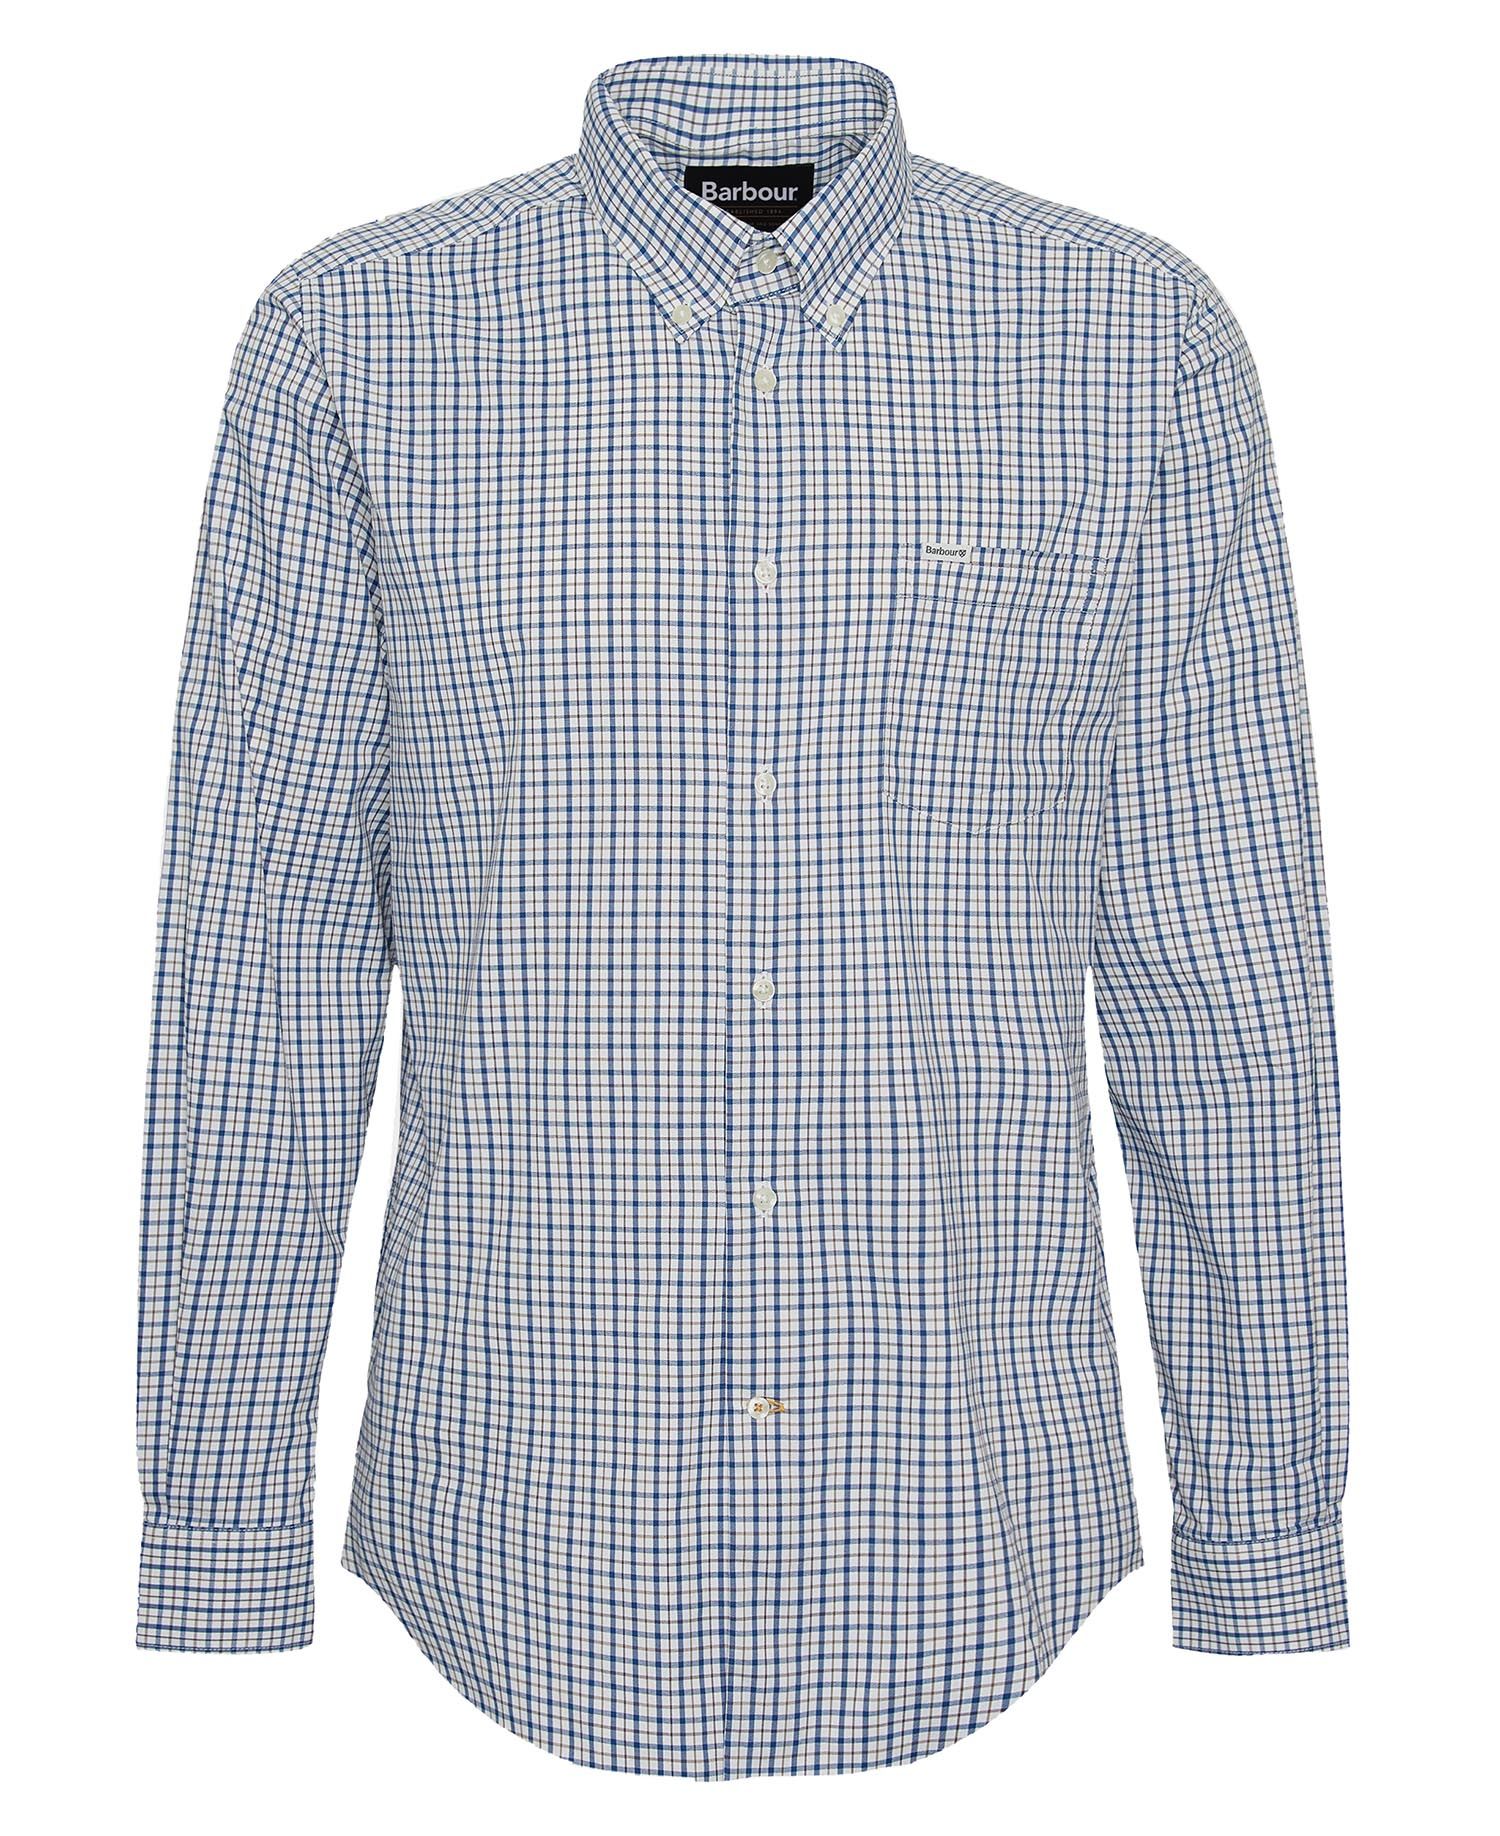 Teesdale Tailored Performance Shirt